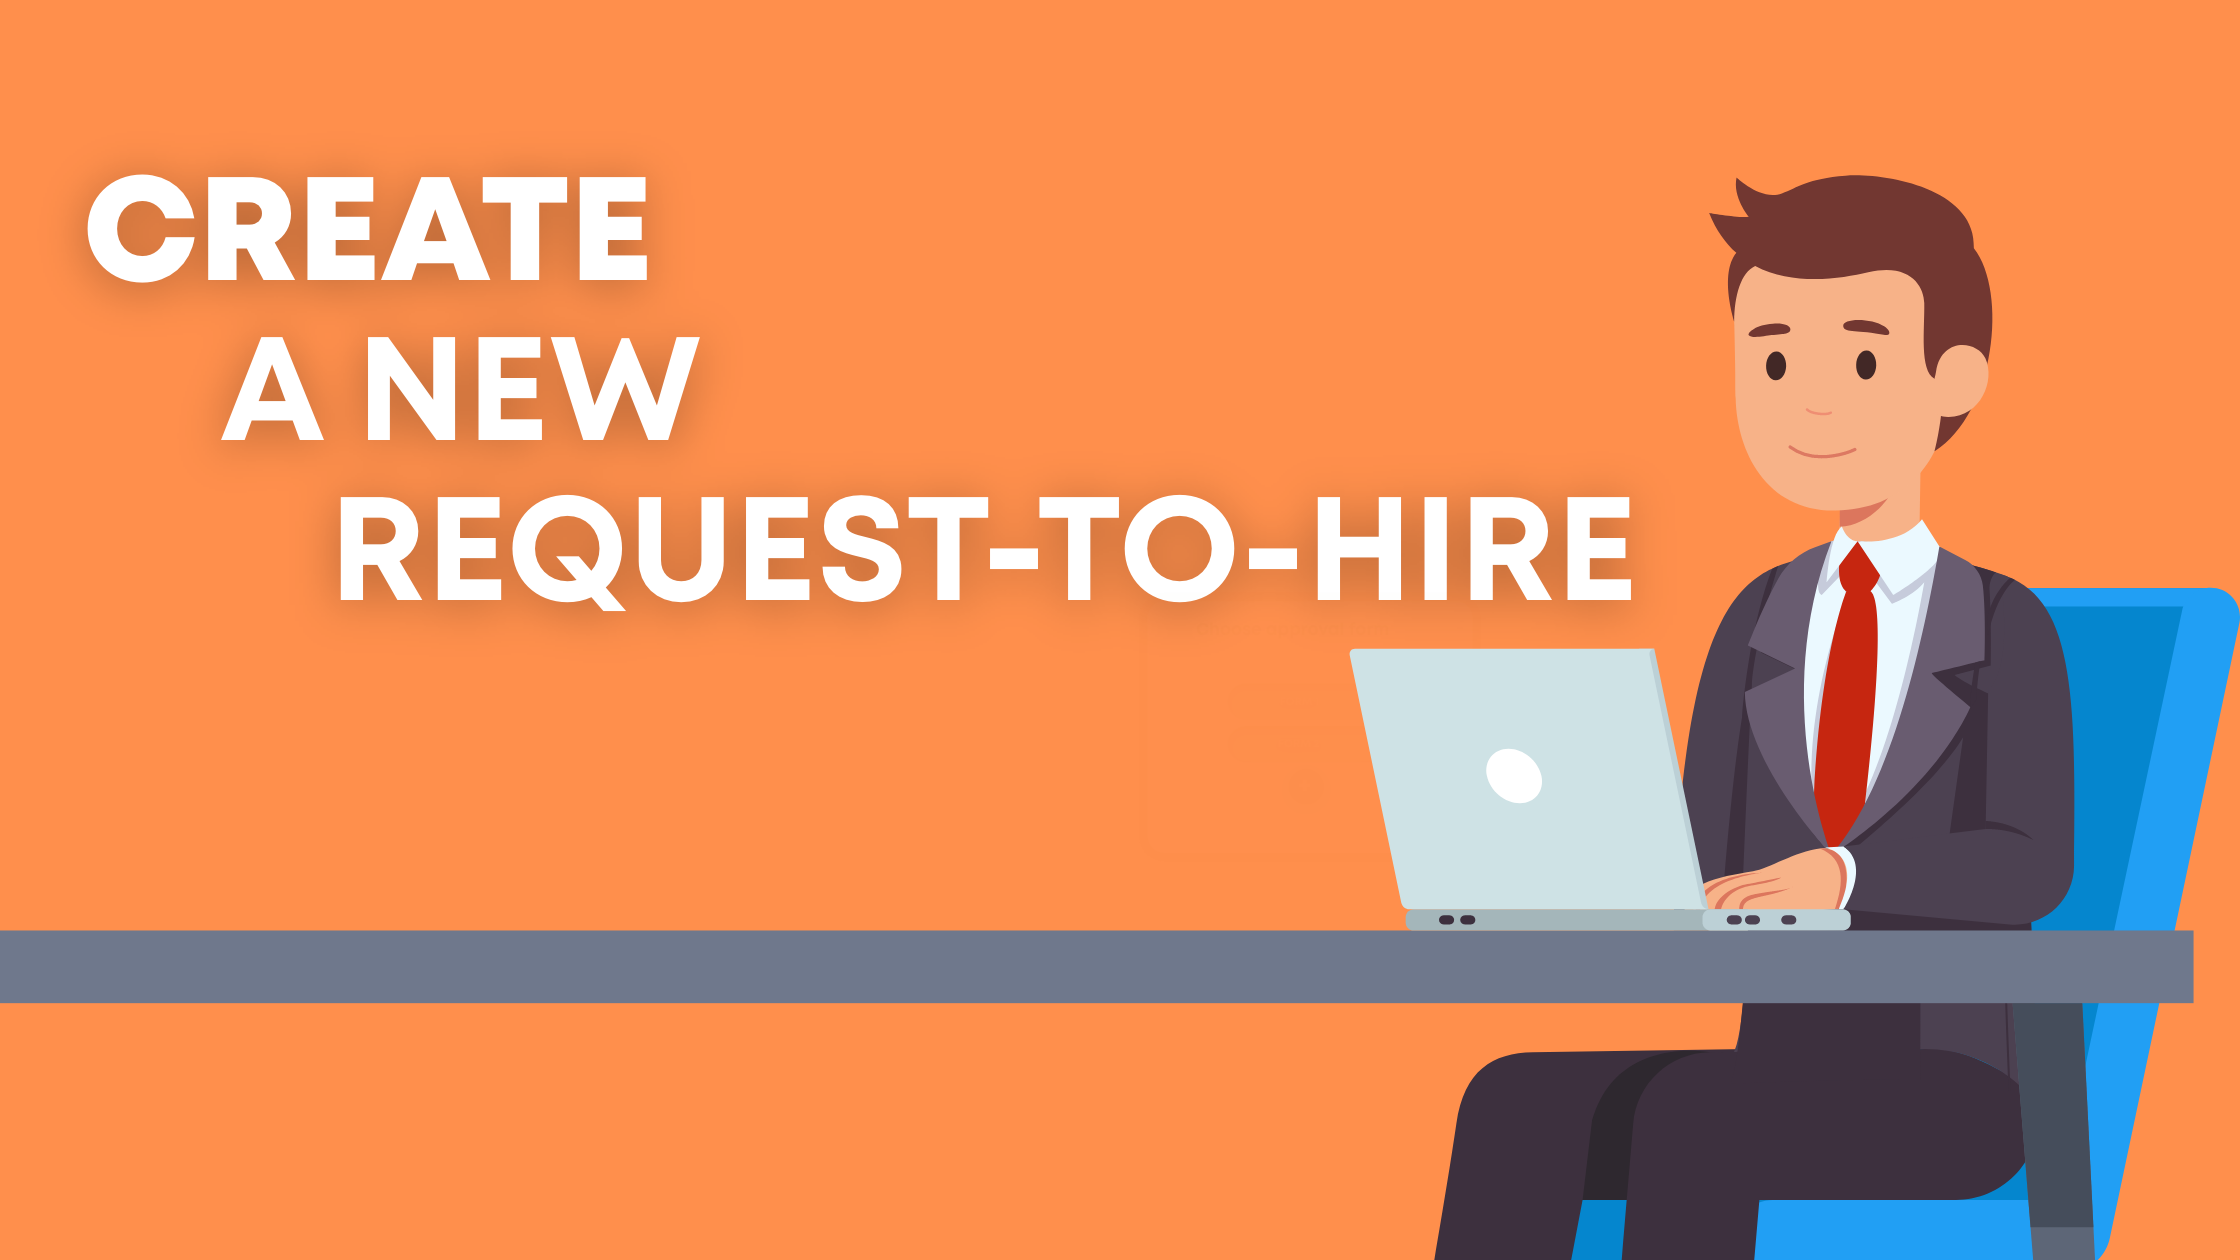 Create-a-new-request-to-hire